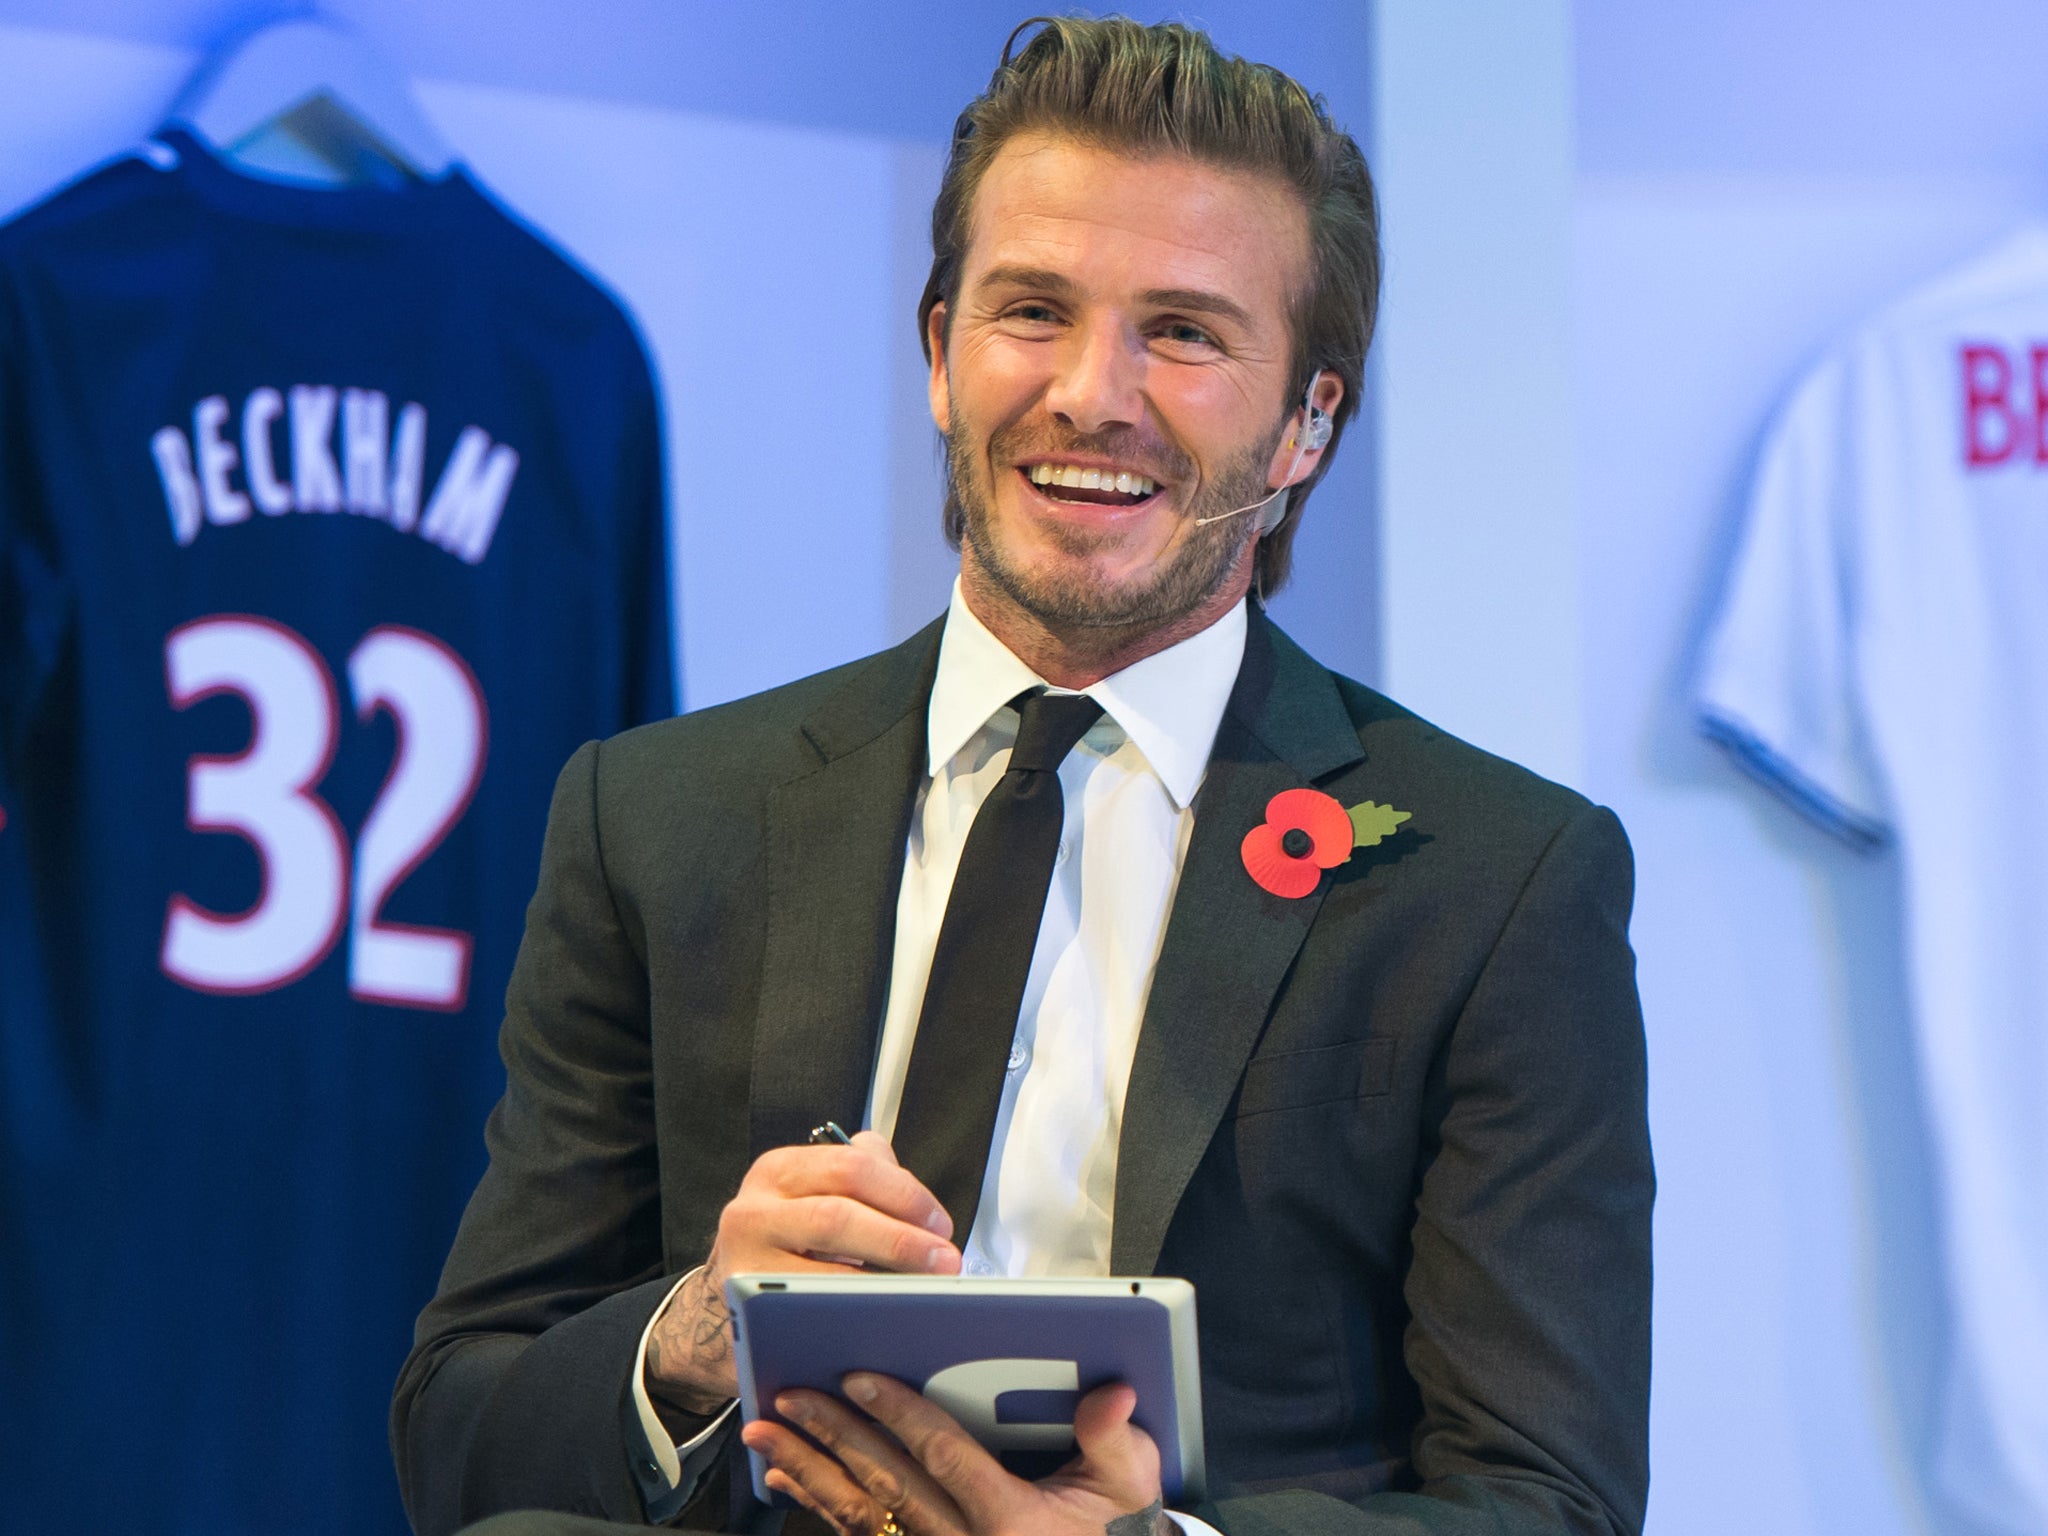 David Beckham at the launch of his latest book